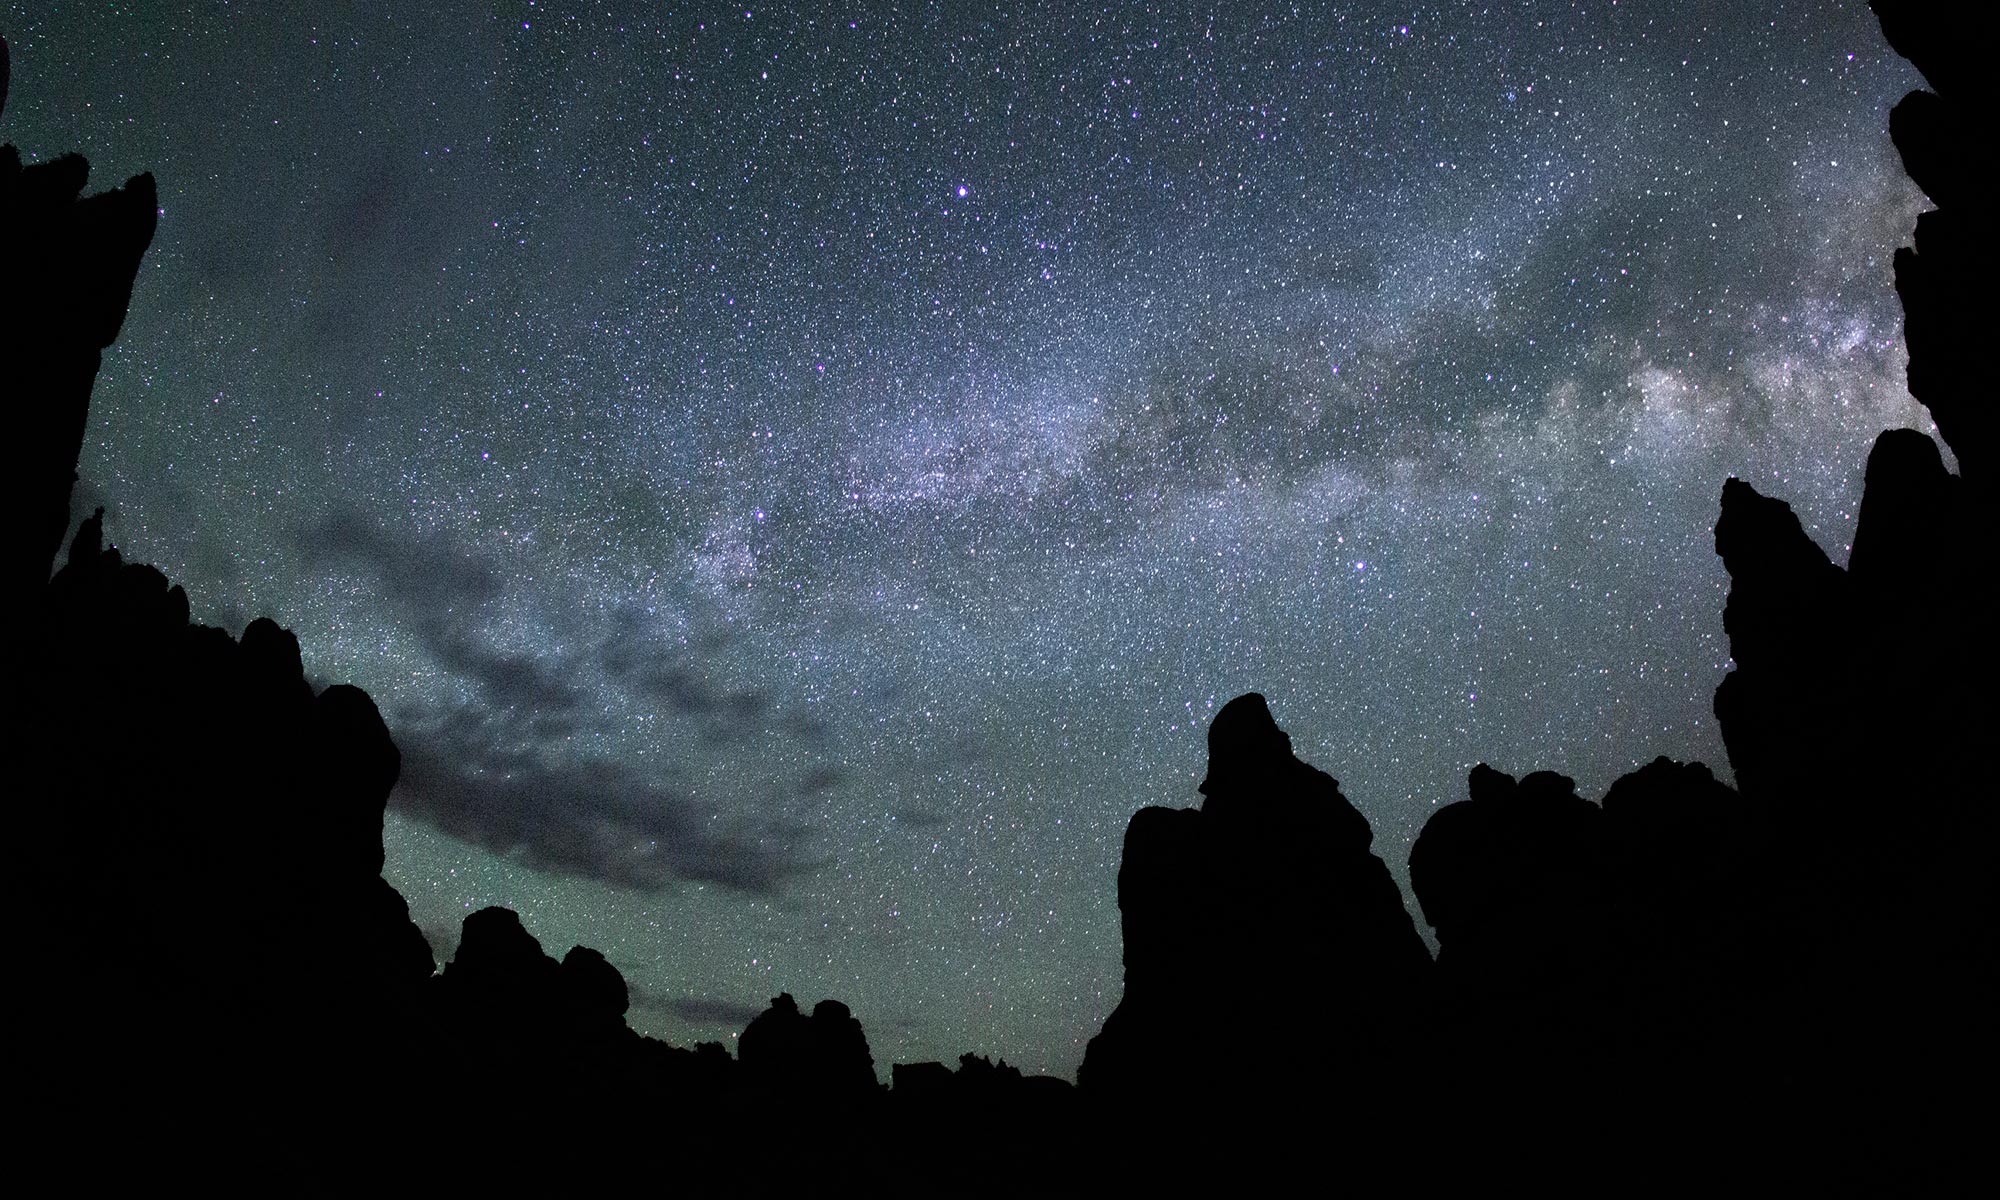 The Milky Way over The Doll House | NPS Photo by Kait Thomas